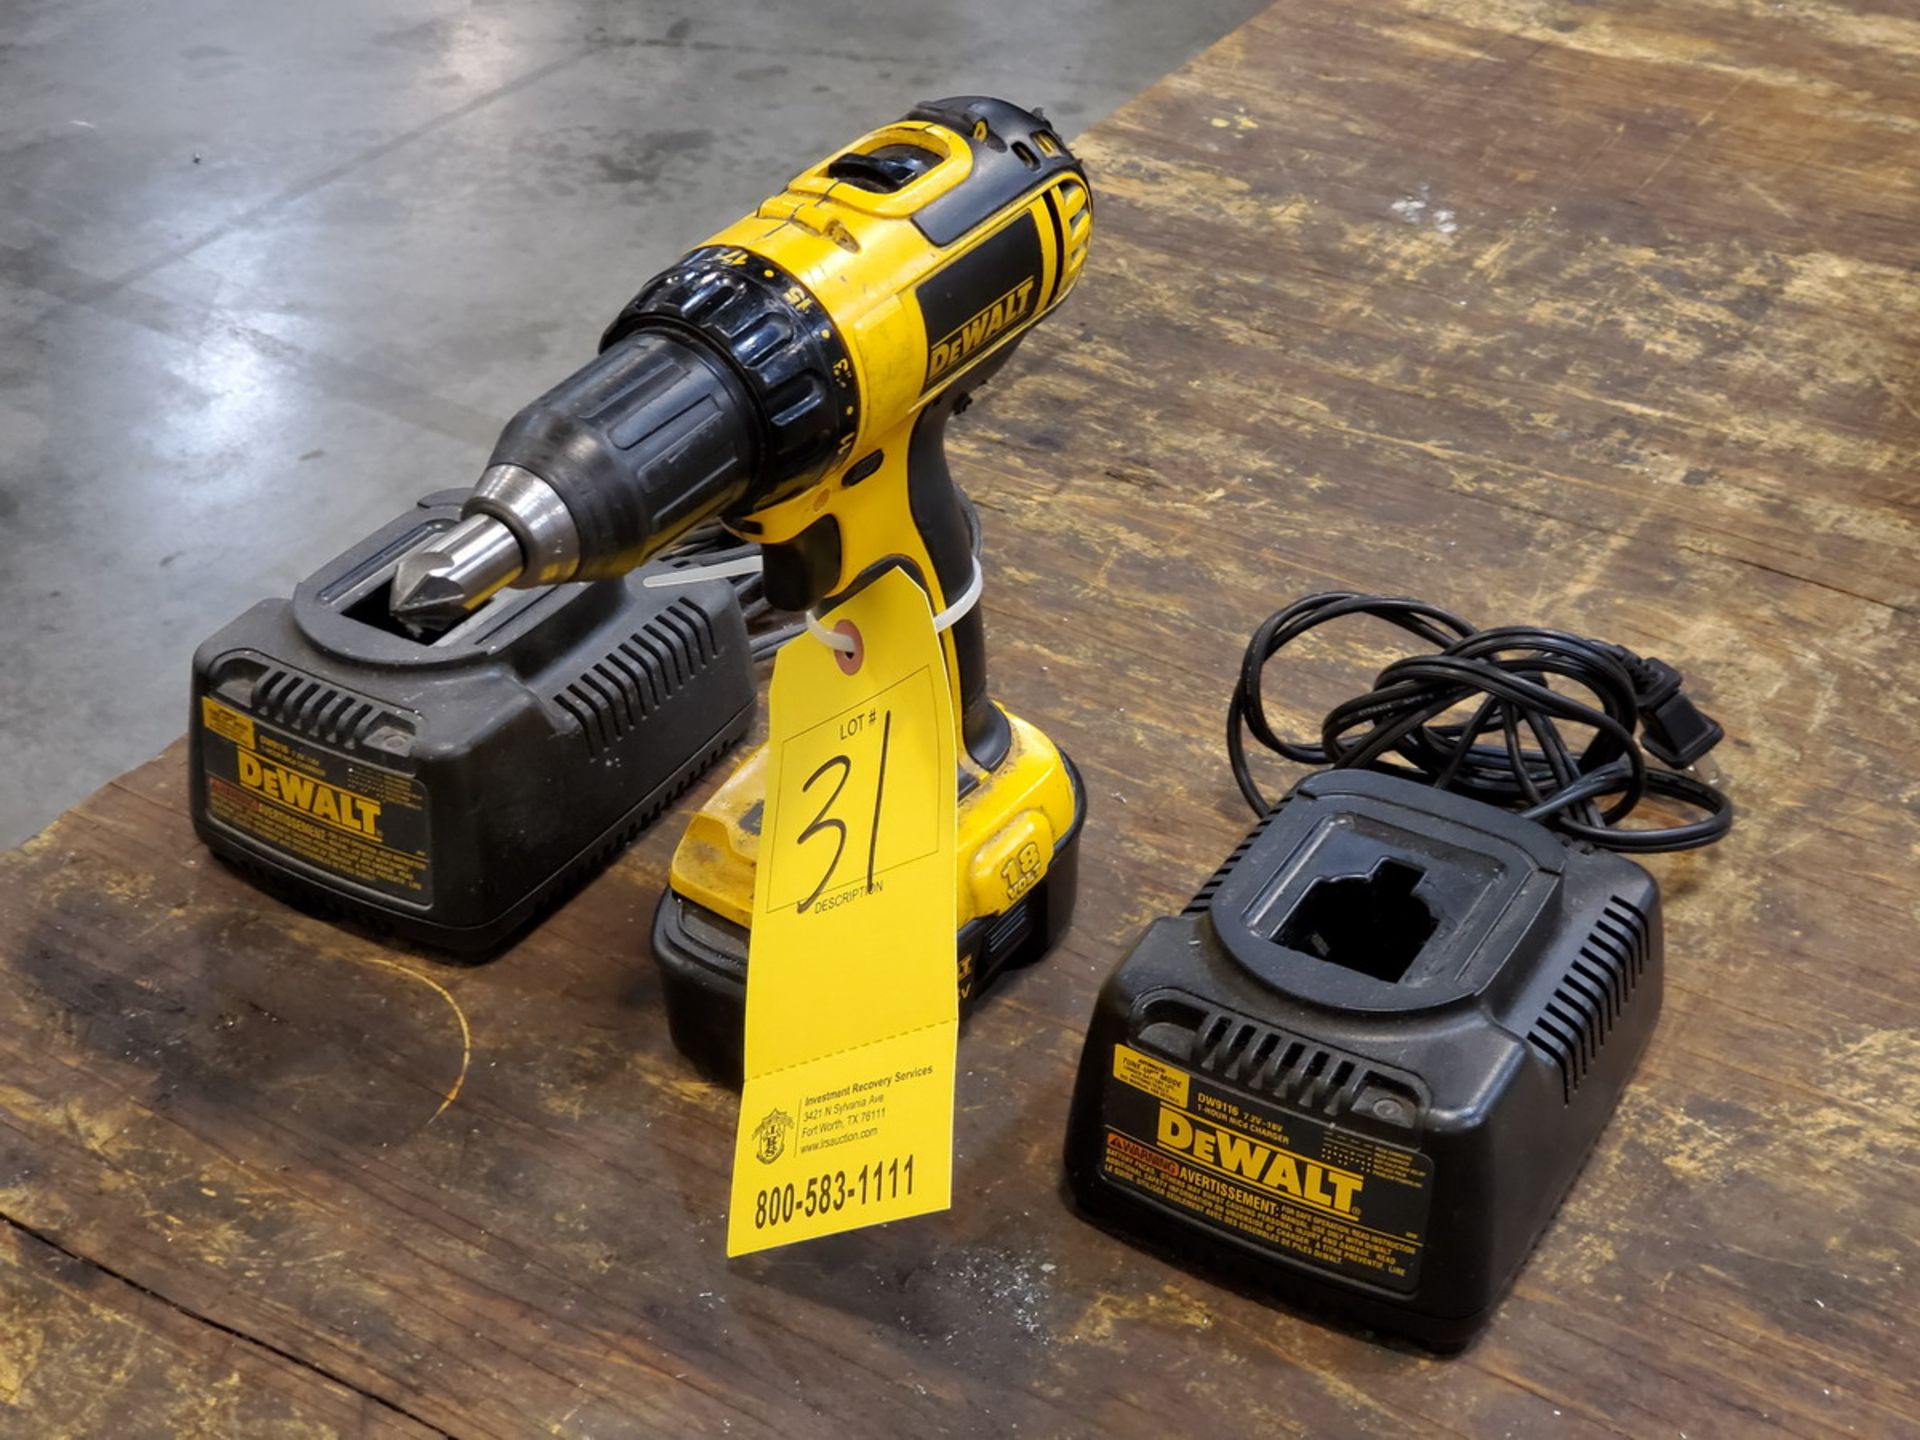 Dewalt DCD760 1/2" Cordless Drill W/ (2) Chargers - Image 2 of 3